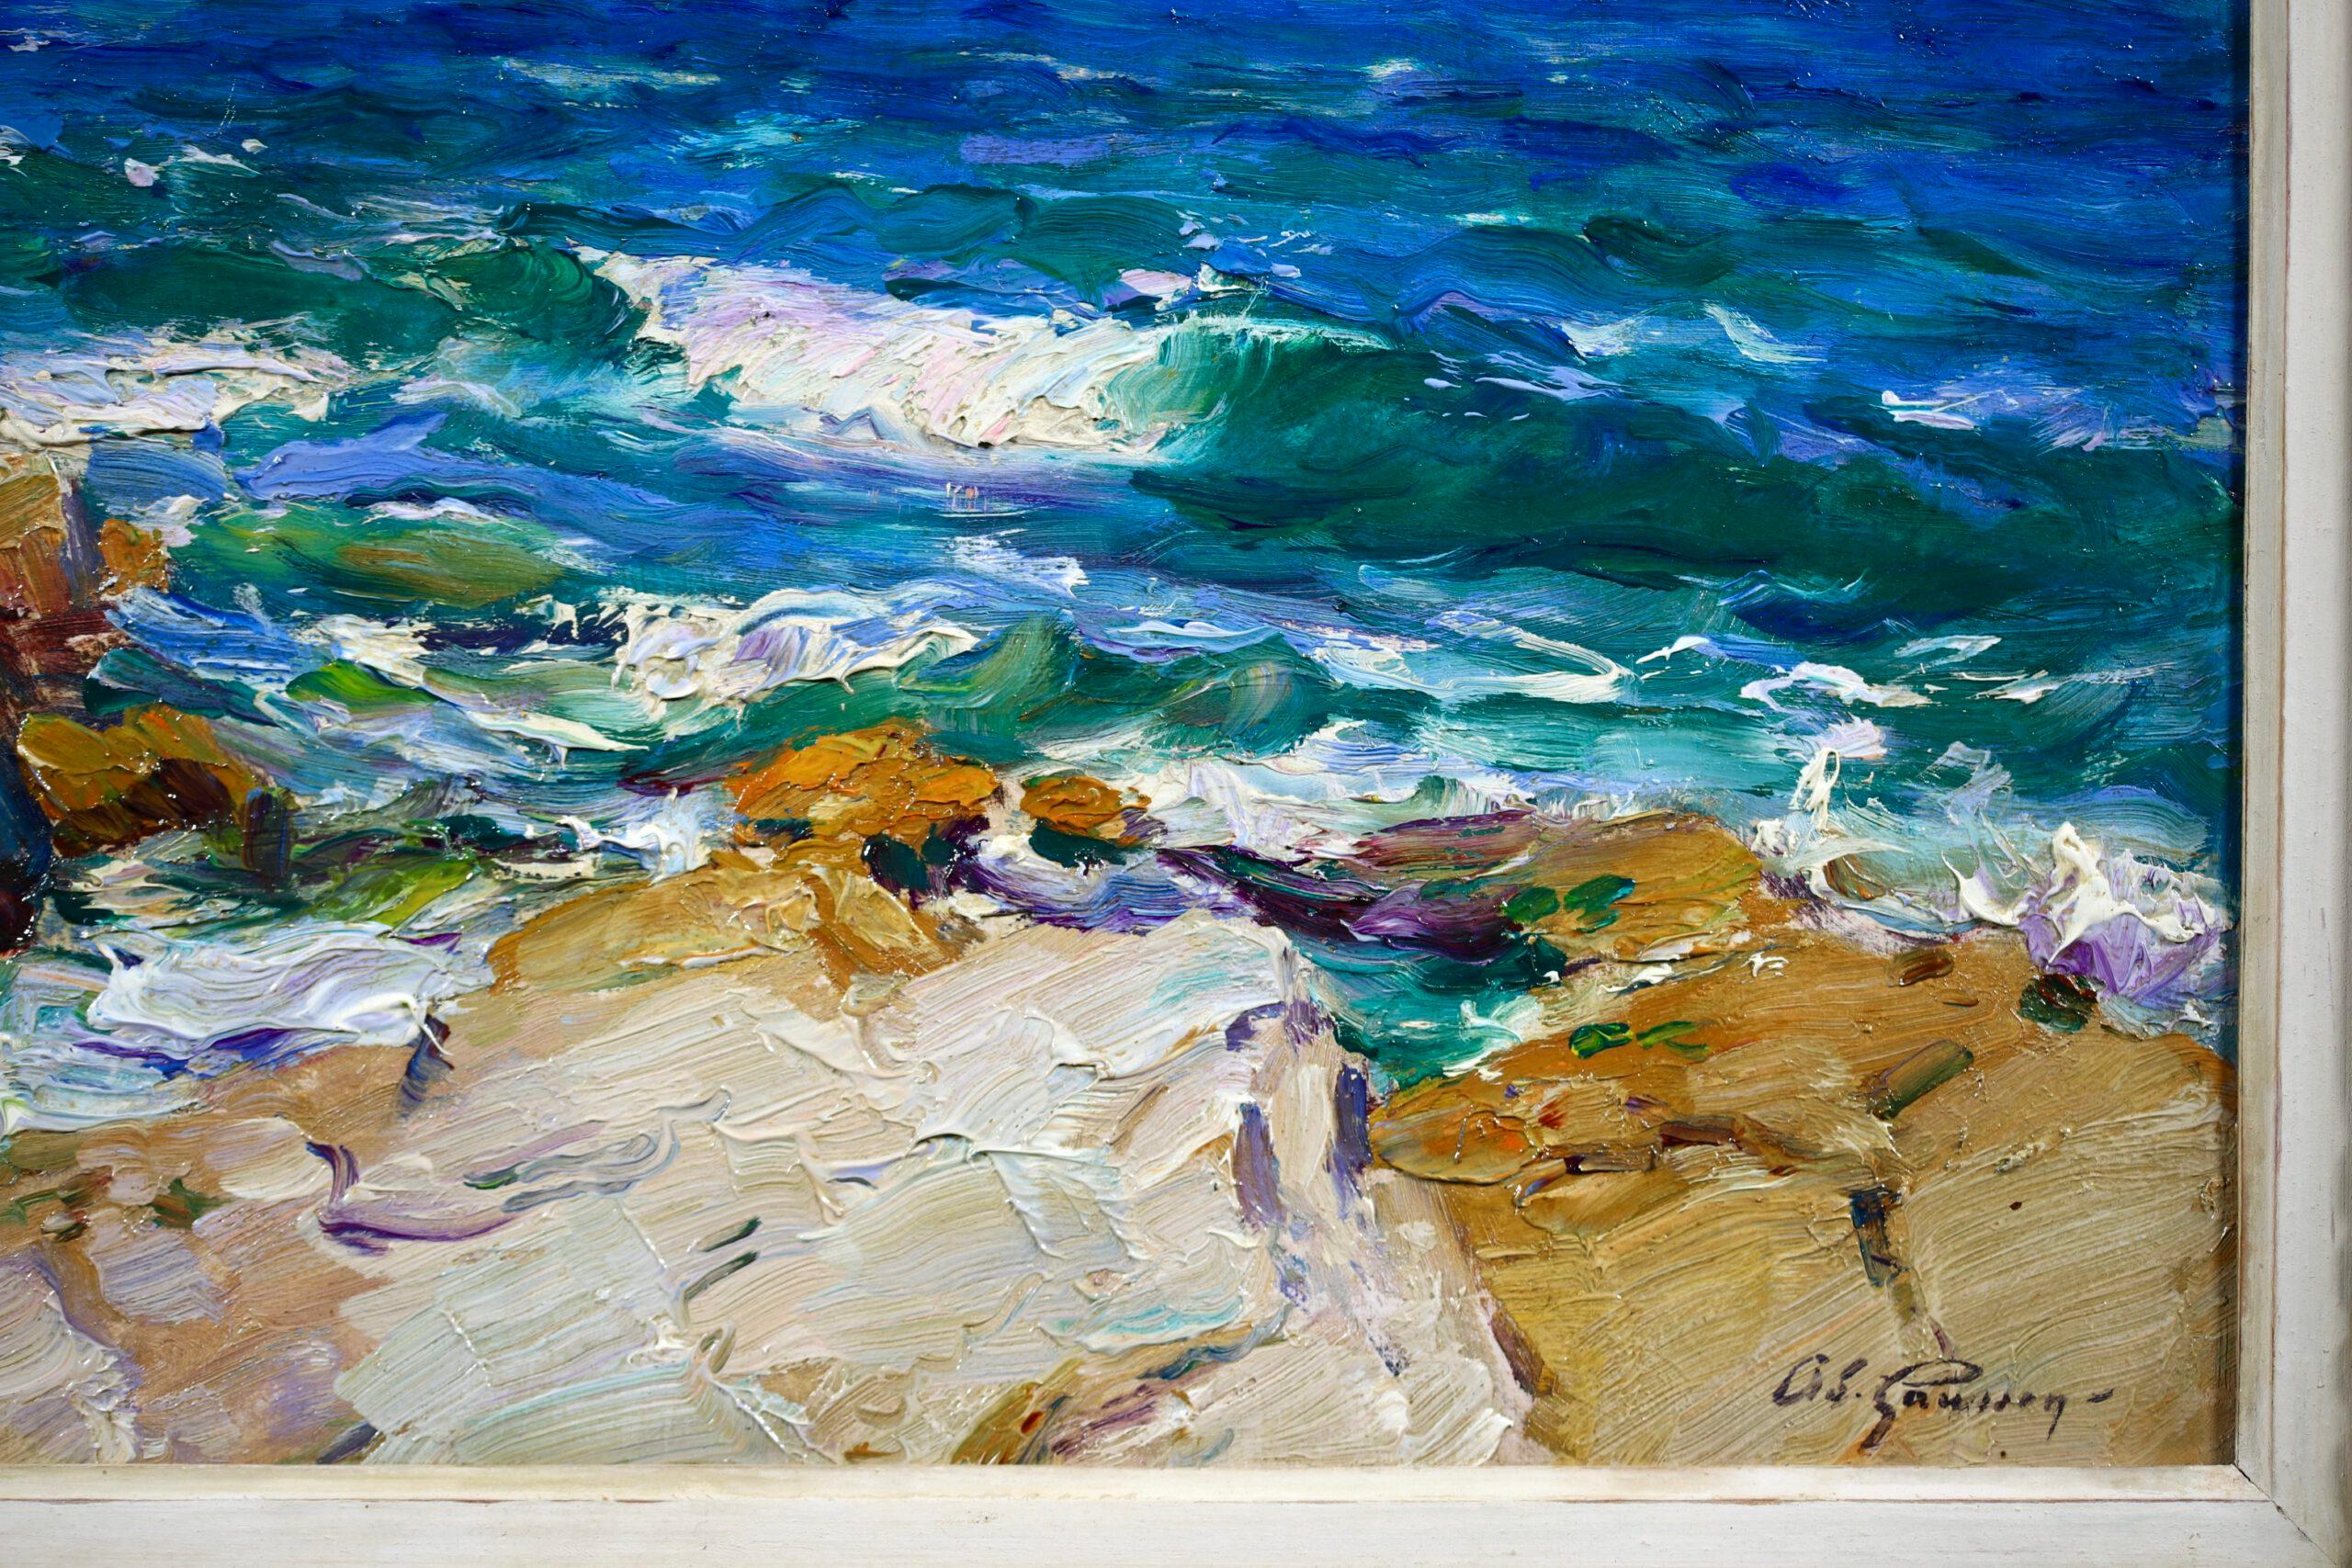 Signed seascape oil on panel circa 1910 by French painter post impressionist painter Adolphe Louis Gaussen. The work depicts a view of the bright blue sea from a rocky shoreline on the coast of Marseille, France. There is a small white sailing boat